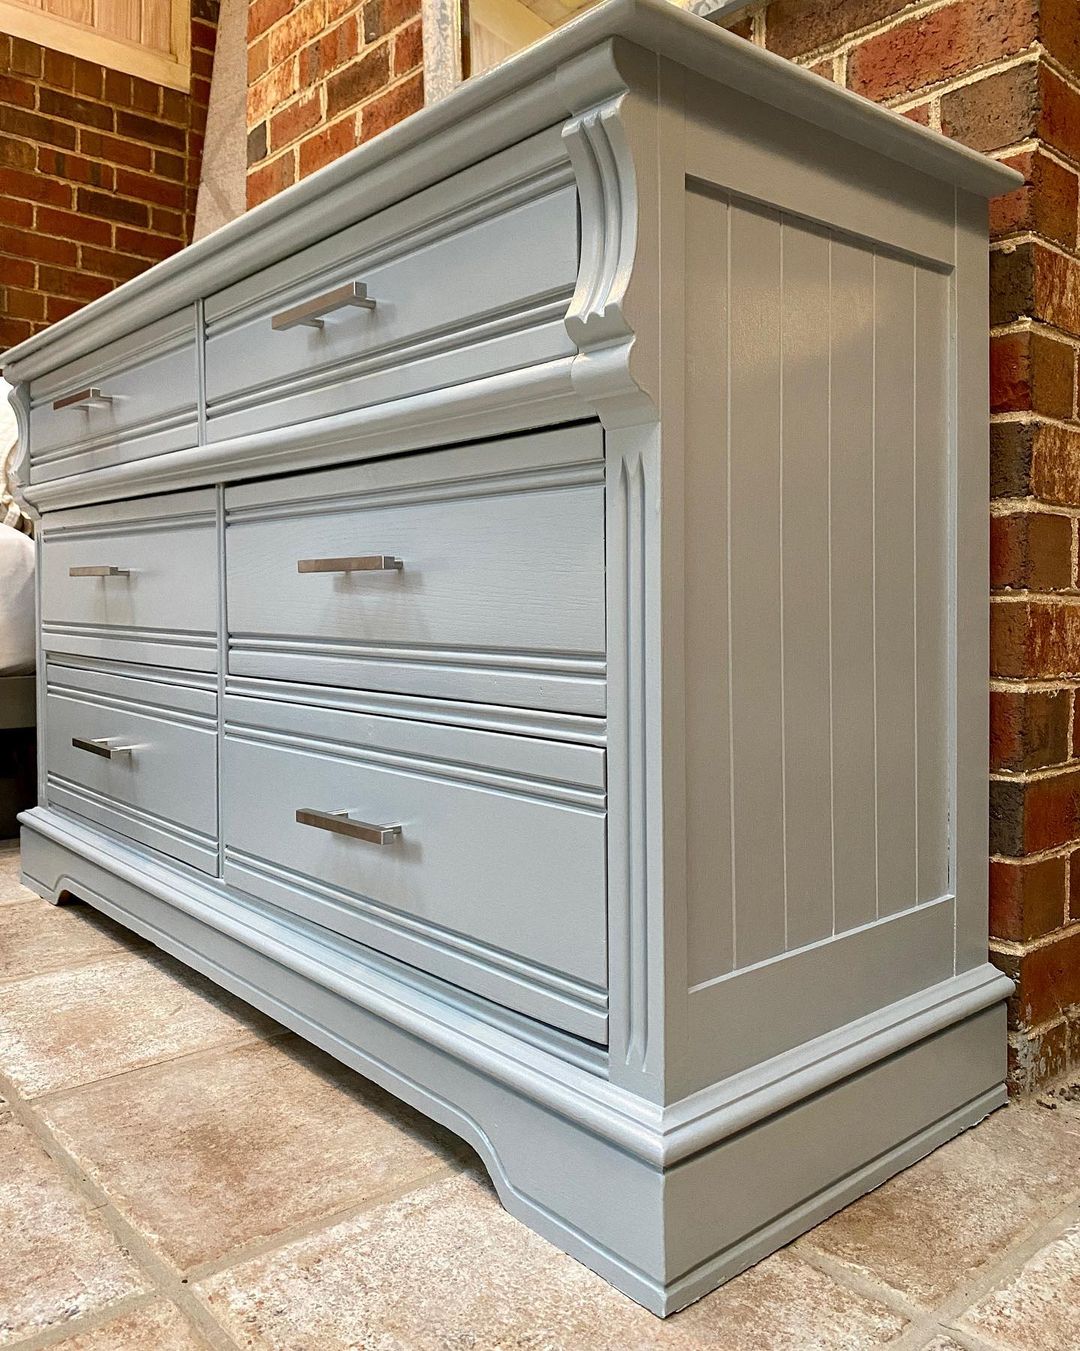 Furniture painted with Sherwin WIlliams Uncertain Gray